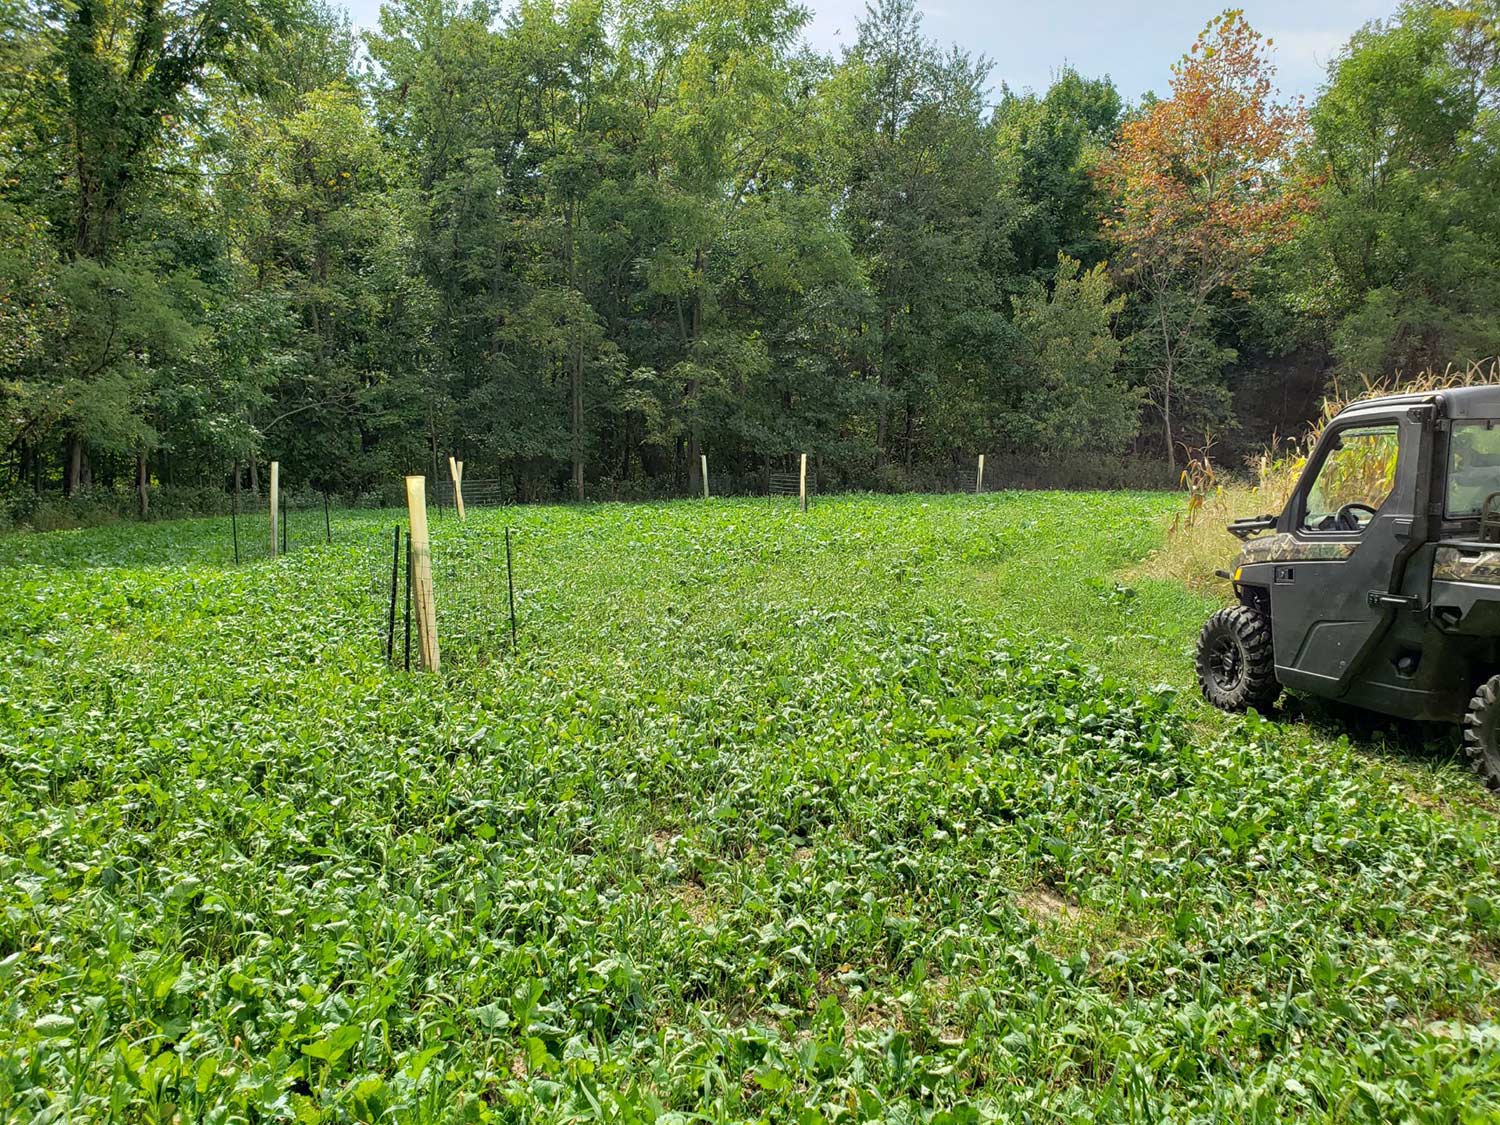 a food plot with a polaris ranger parked in it